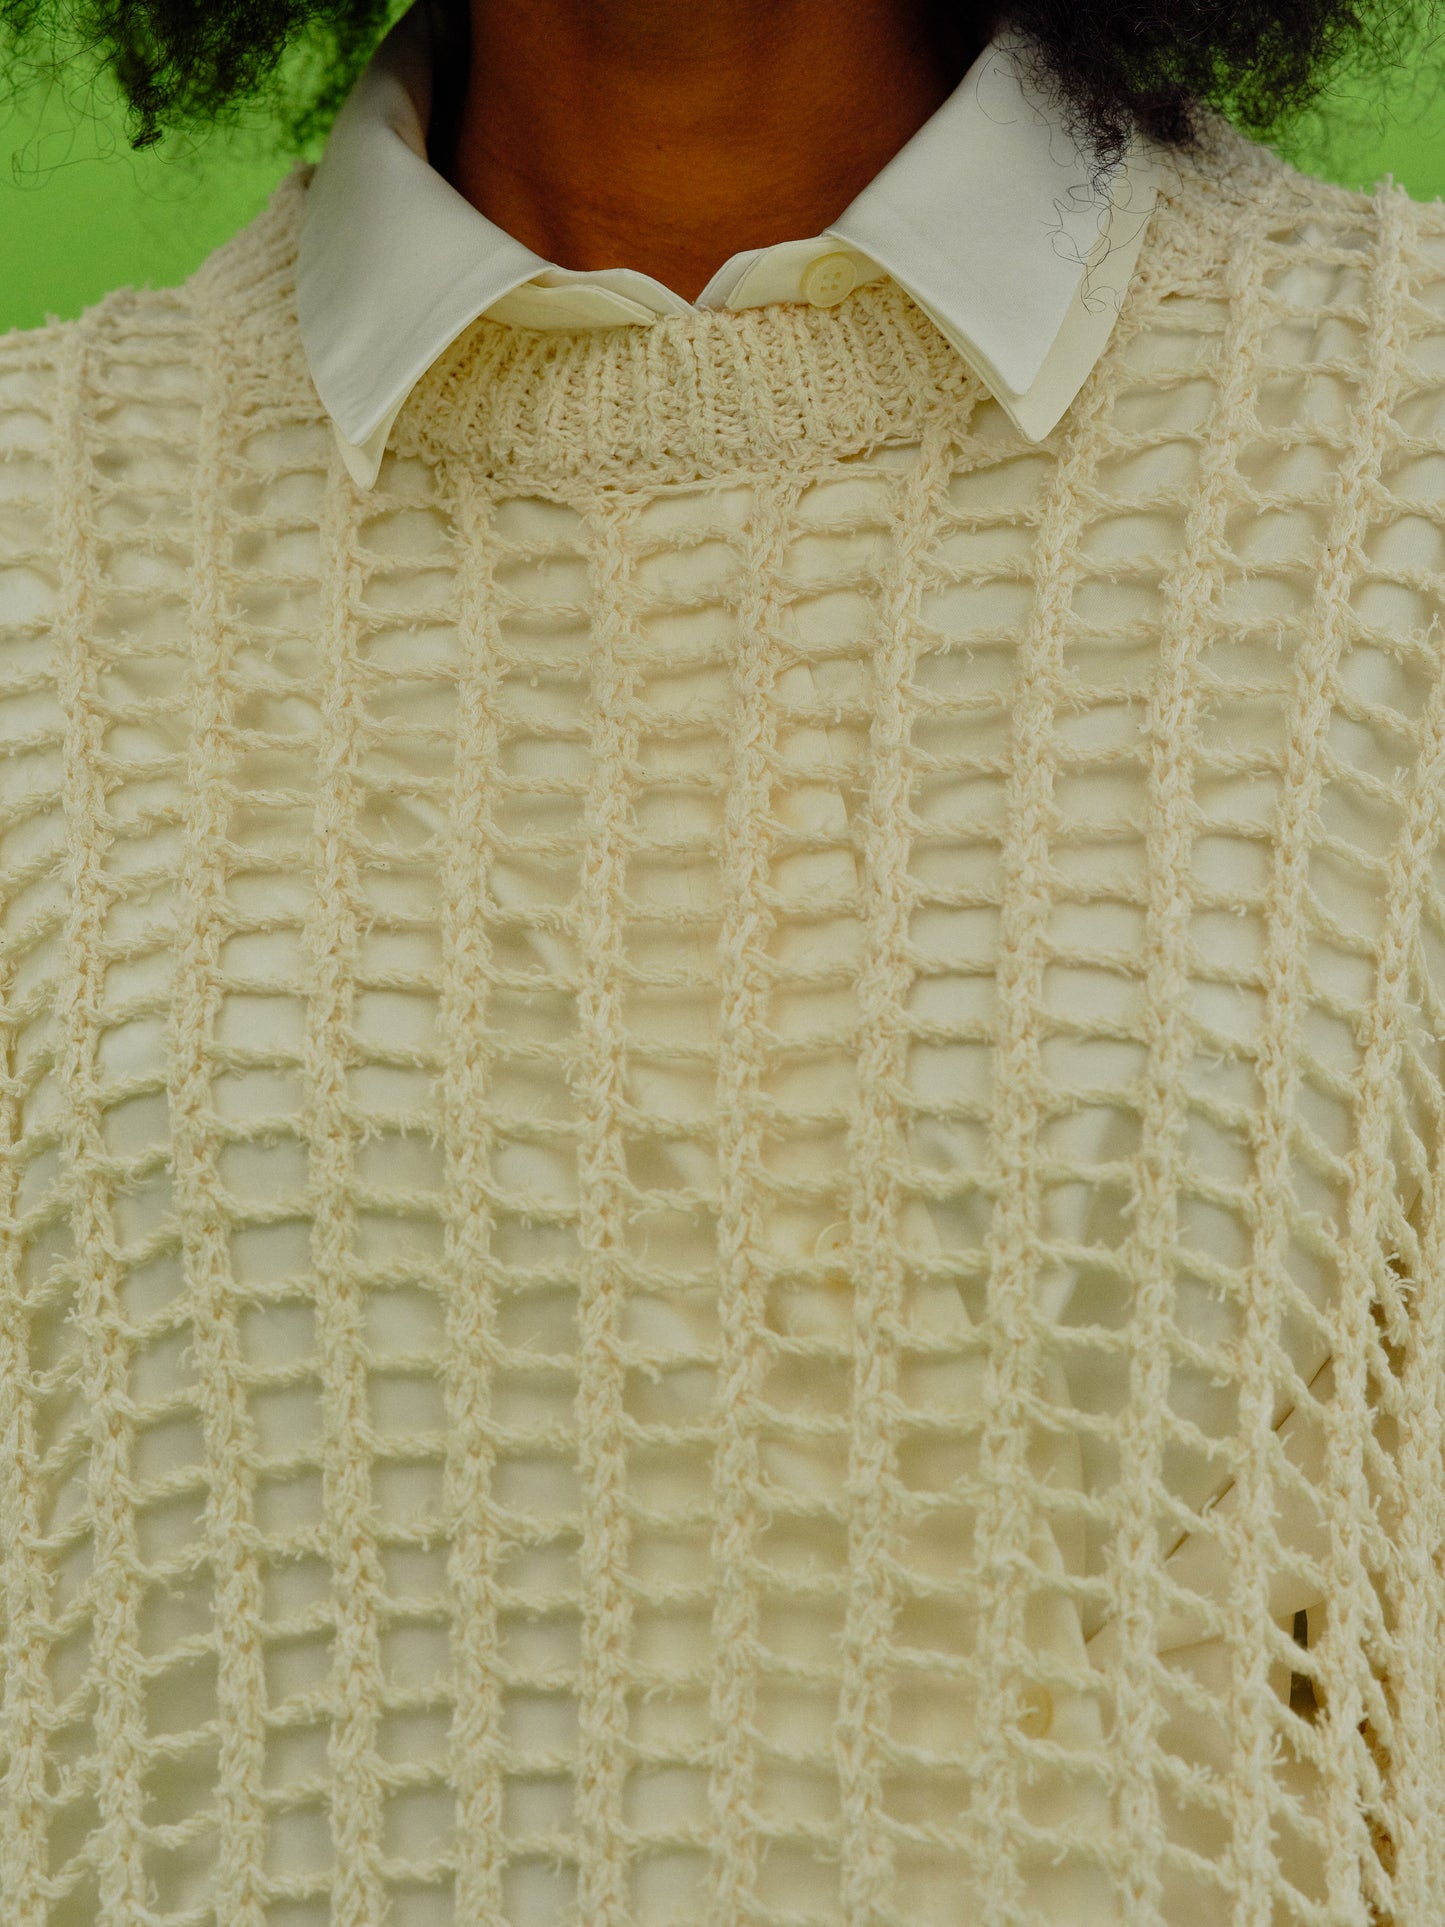 Paper & Bamboo Crocheted Sweater, Natural